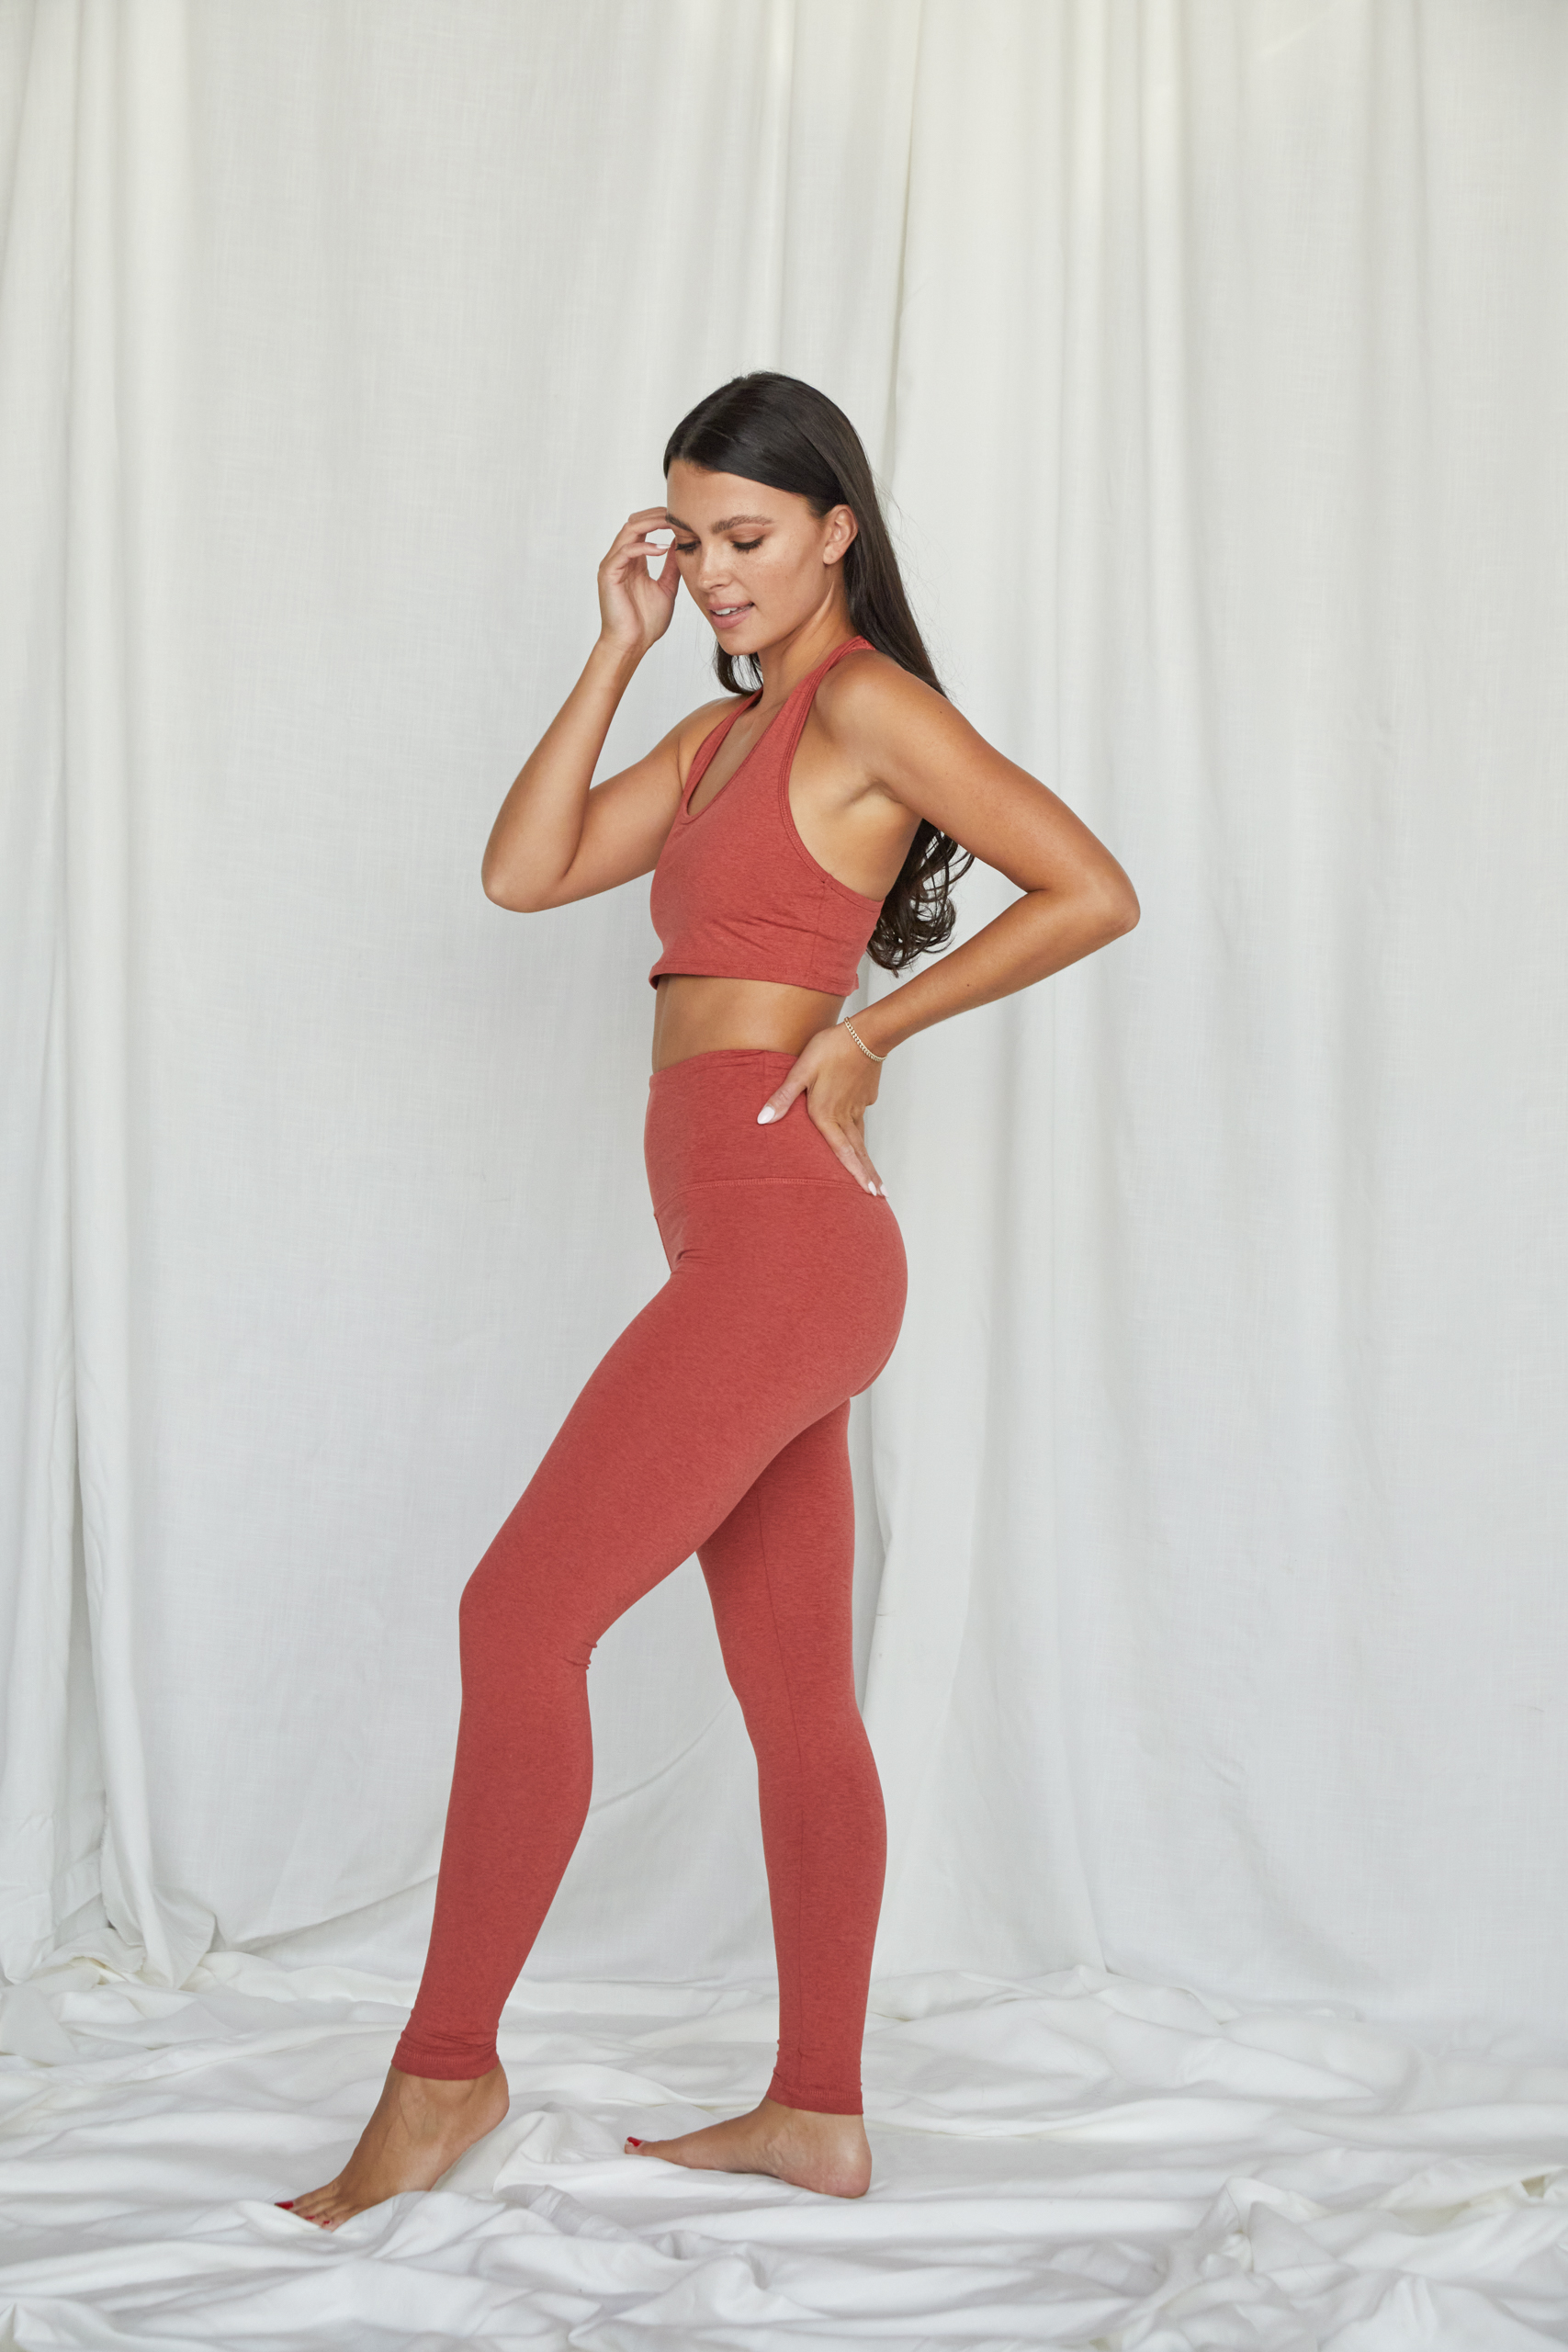 The Charlie Ankle Leggings - Strut This - simplyWORKOUT